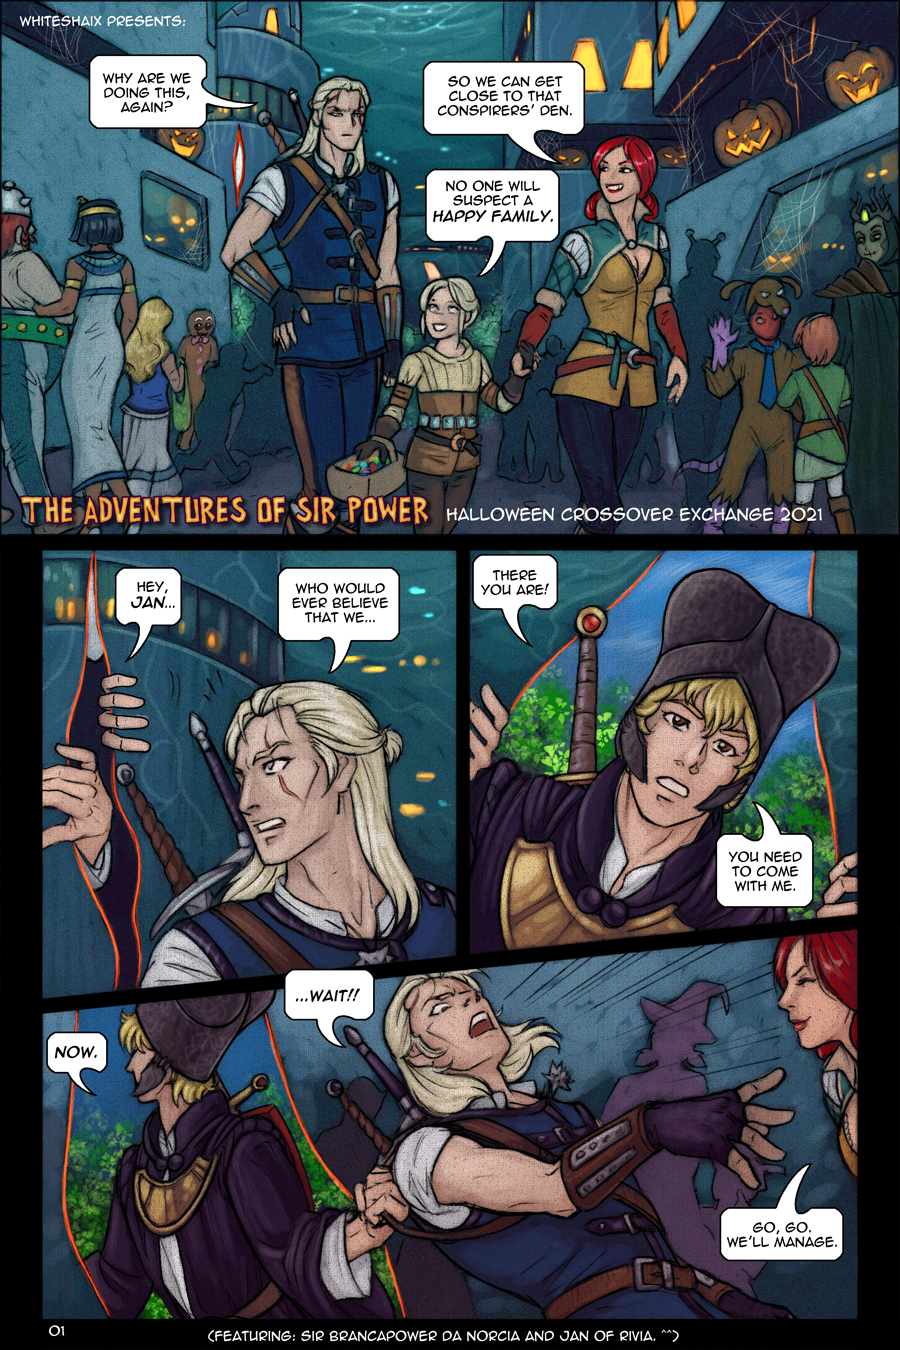 The Adventures of Sir Power by whiteshaix page 1 out of 8